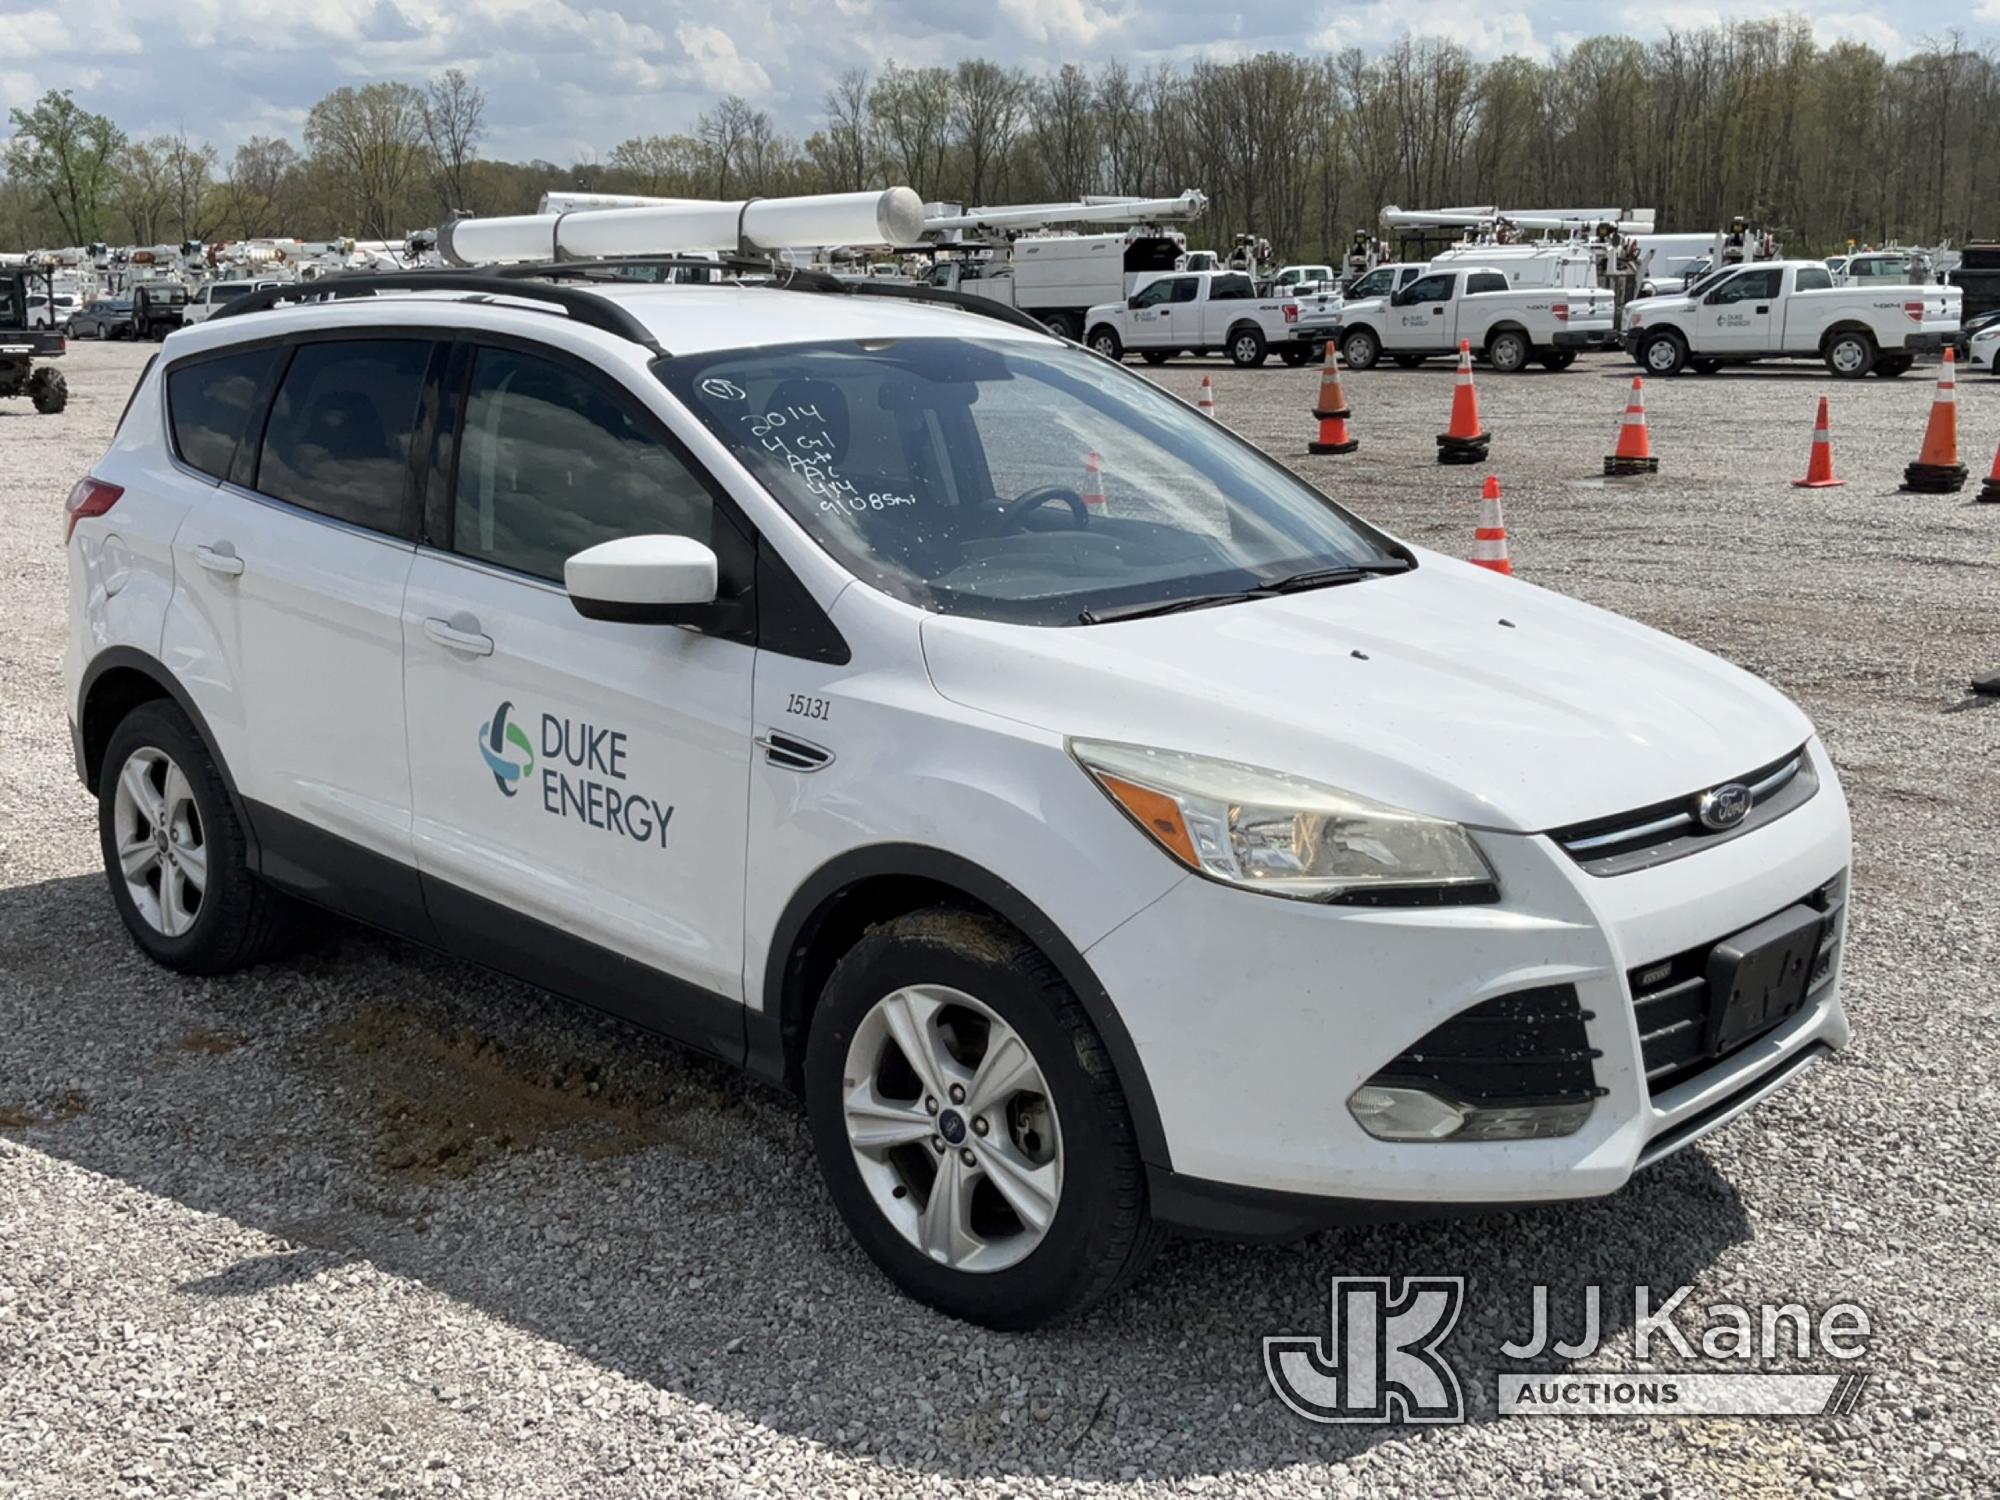 (Verona, KY) 2014 Ford Escape 4x4 4-Door Sport Utility Vehicle Runs & Moves) (Bad Blower Motor, ABS